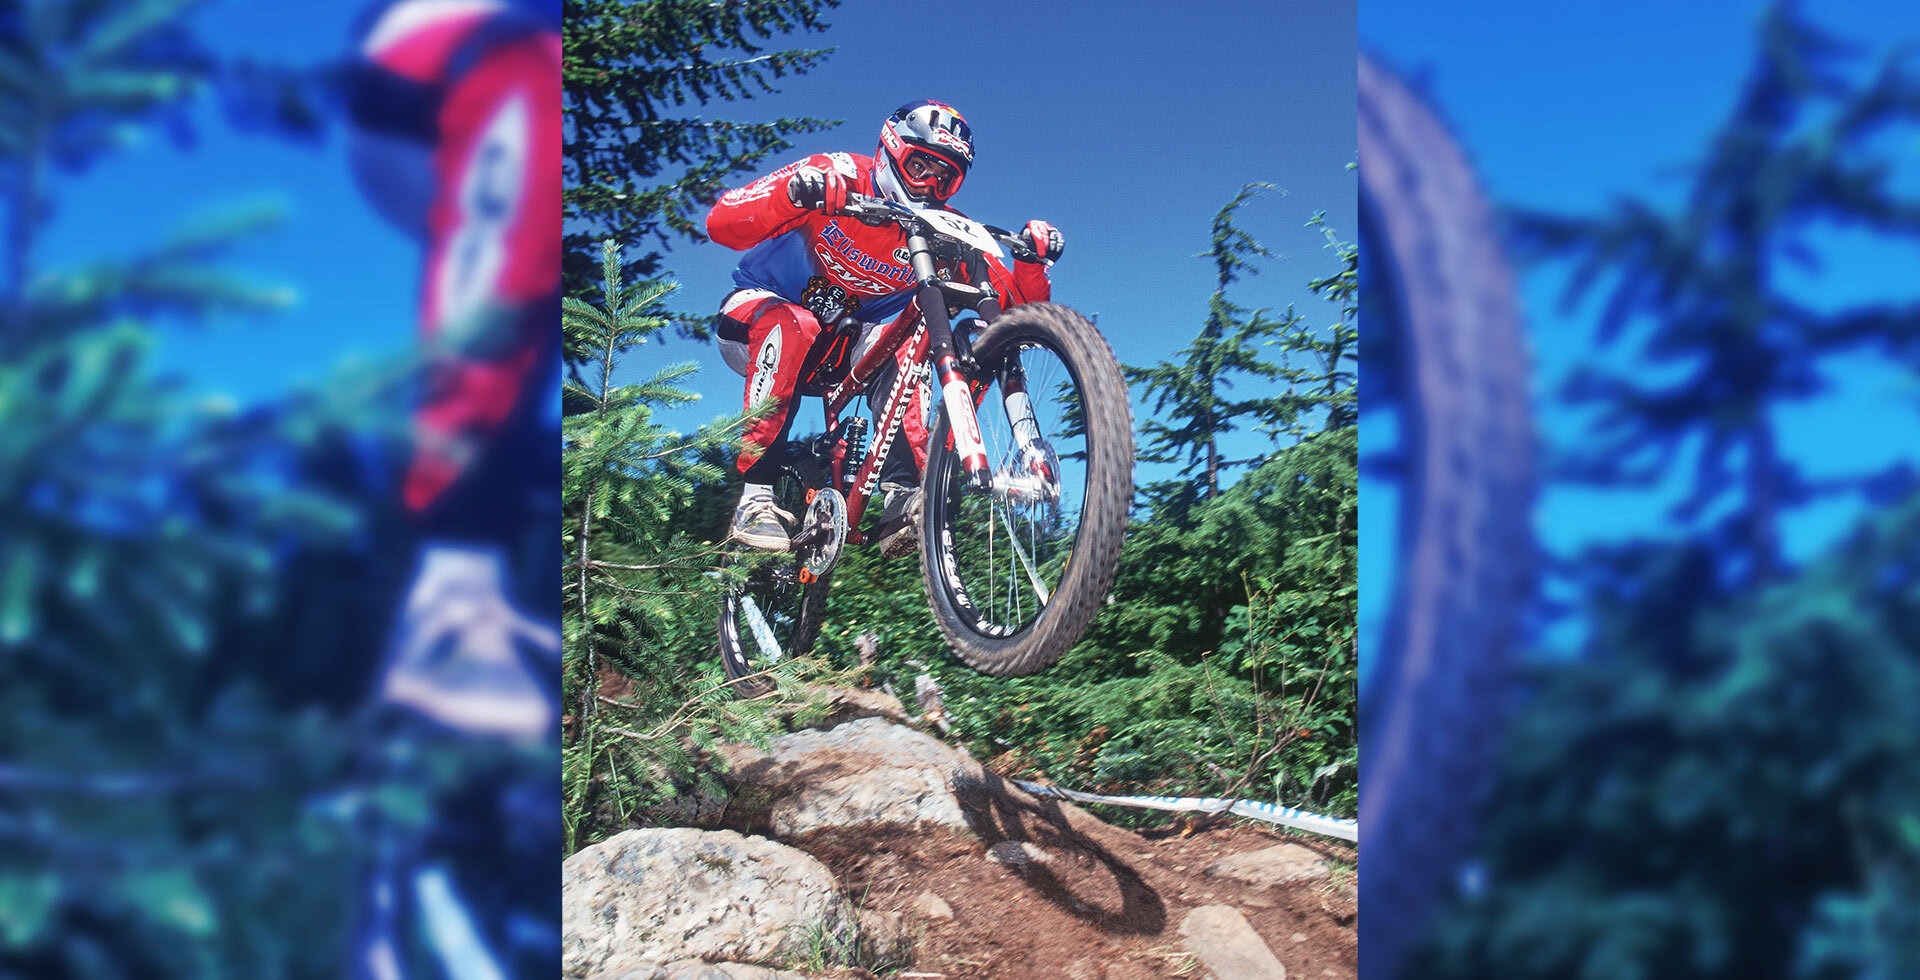 Narrow bars, 26-inch tires and stanchion covers—oh, how the times have changed. Shaums March with his eyes on the prize during the 1998 World Cup race at Snoqualmie Pass, WA.